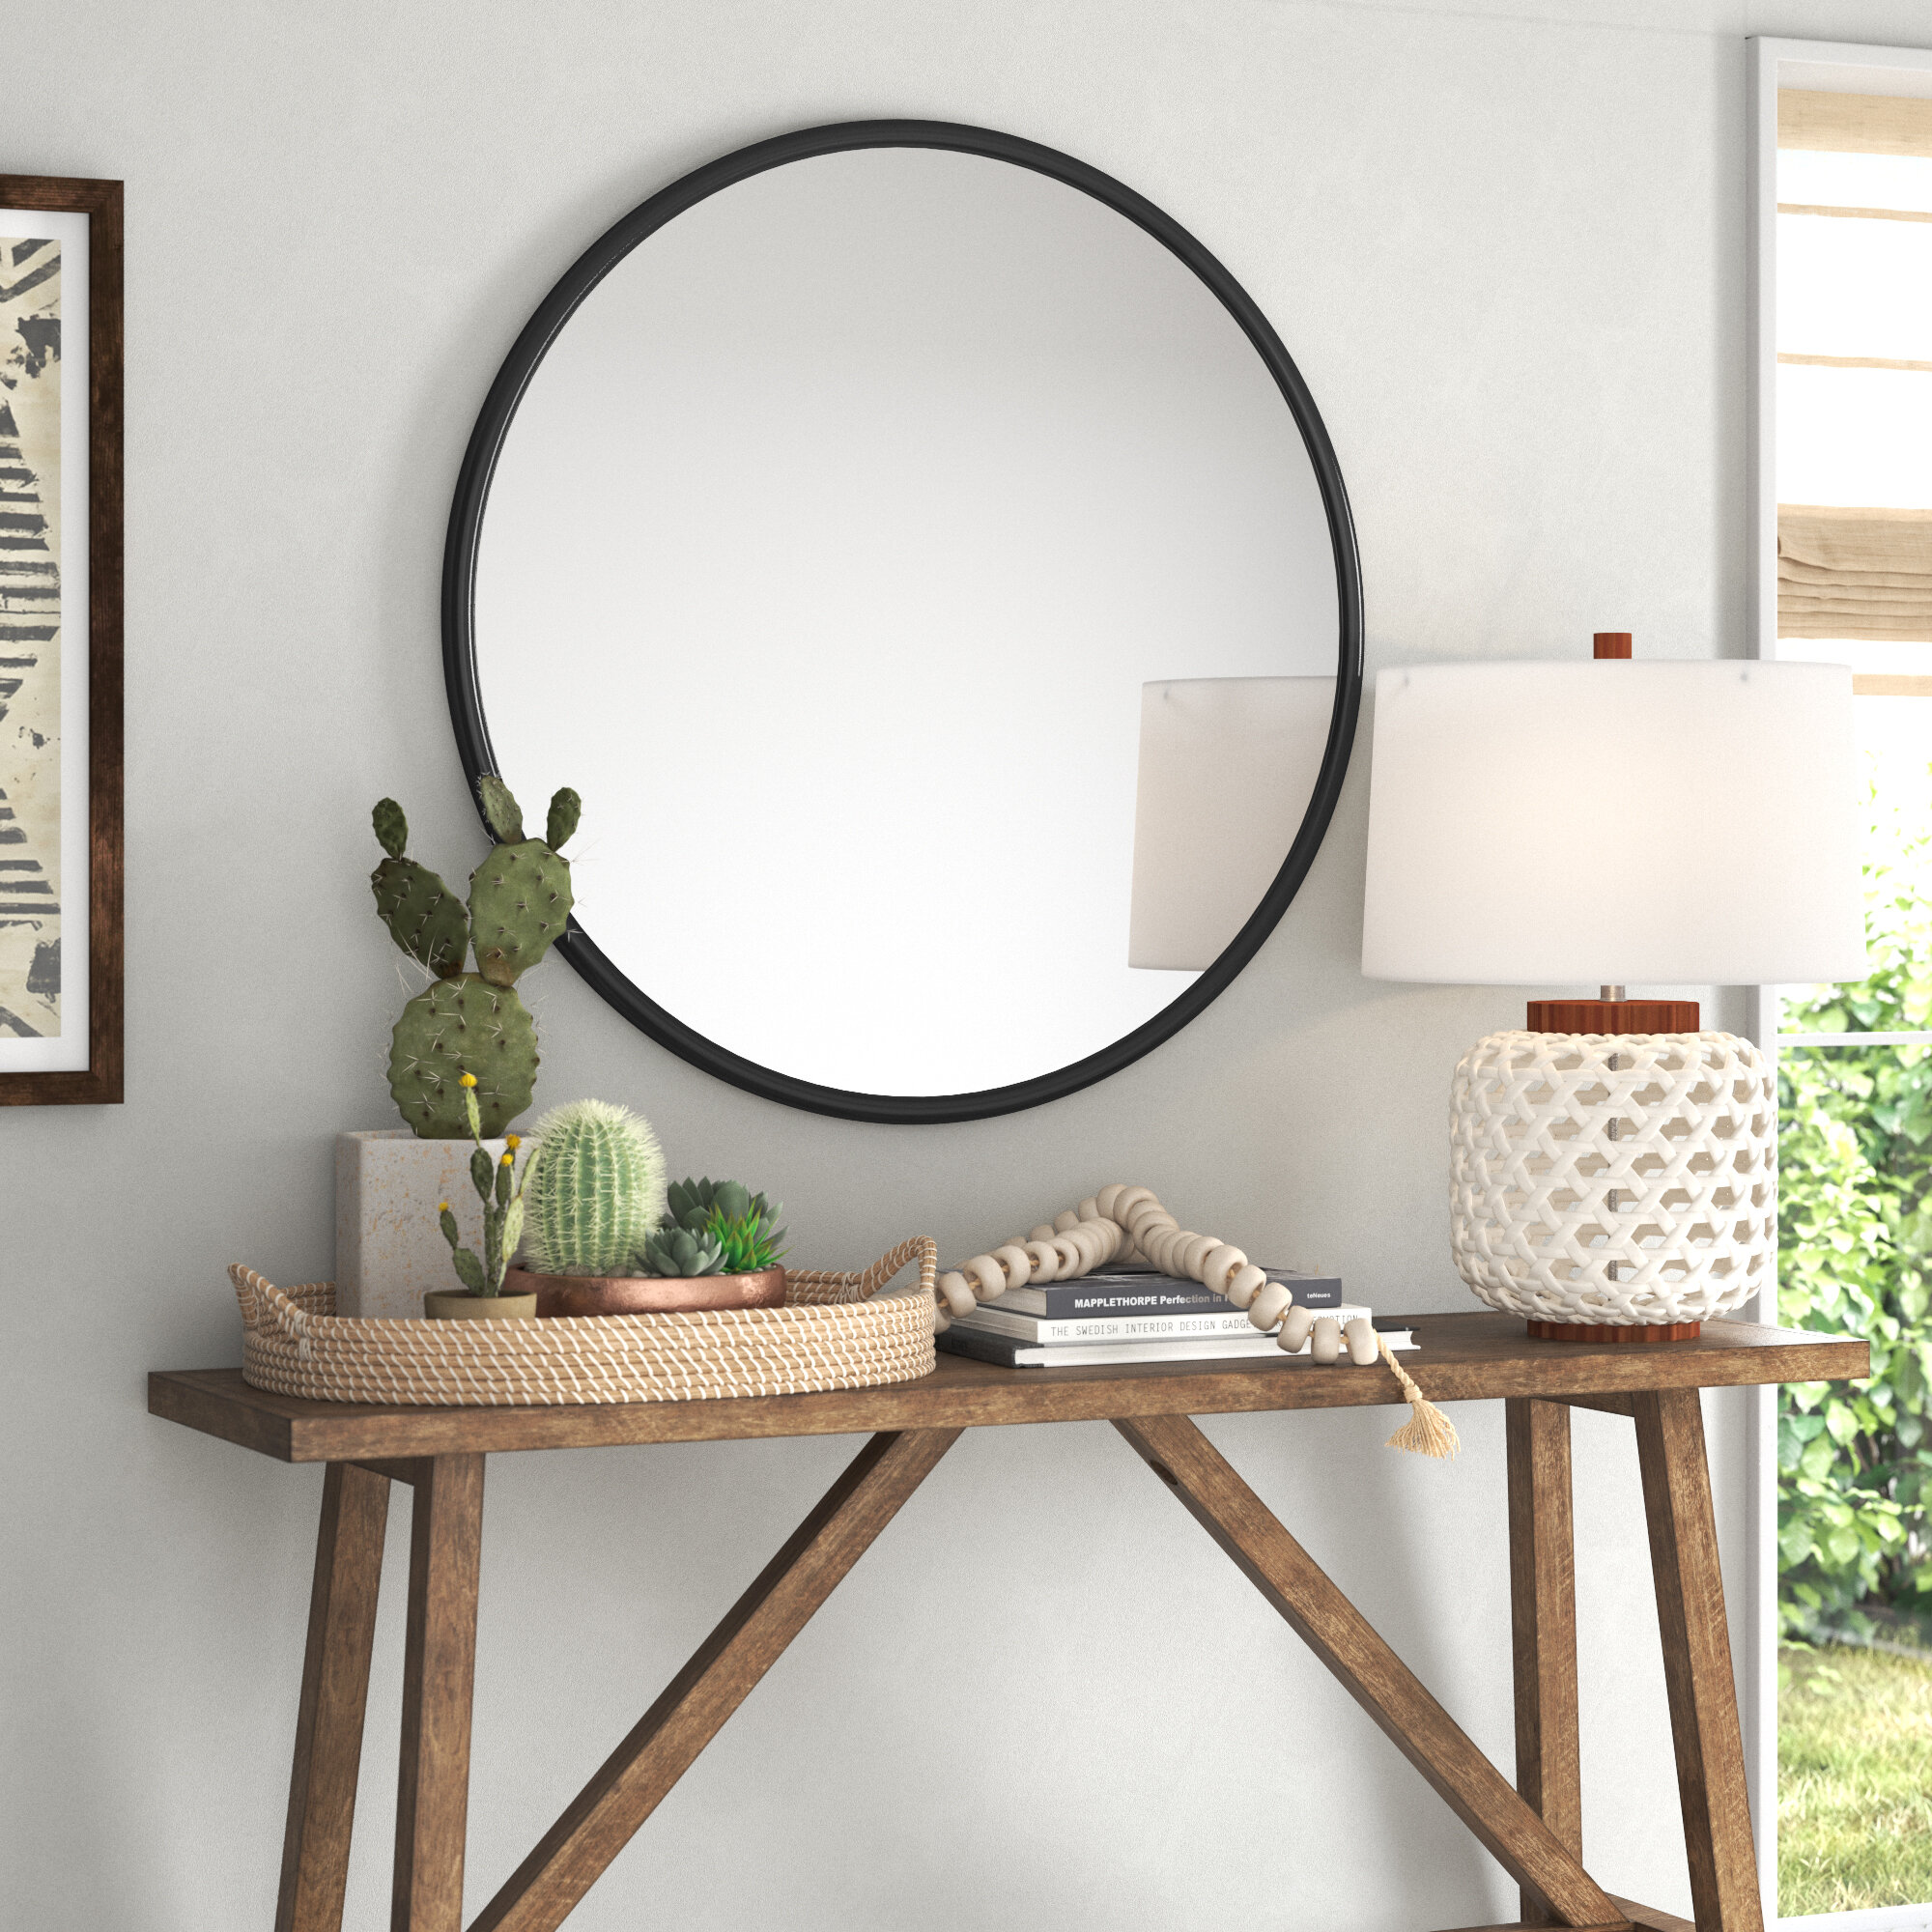 Round Mirror with Brushed Metal Frame,37 inch Black Mirror Deby Wall Mirror Large Simple Mirror for Bathrooms Entryways Fireplace Circle Mirror,Home Decor 